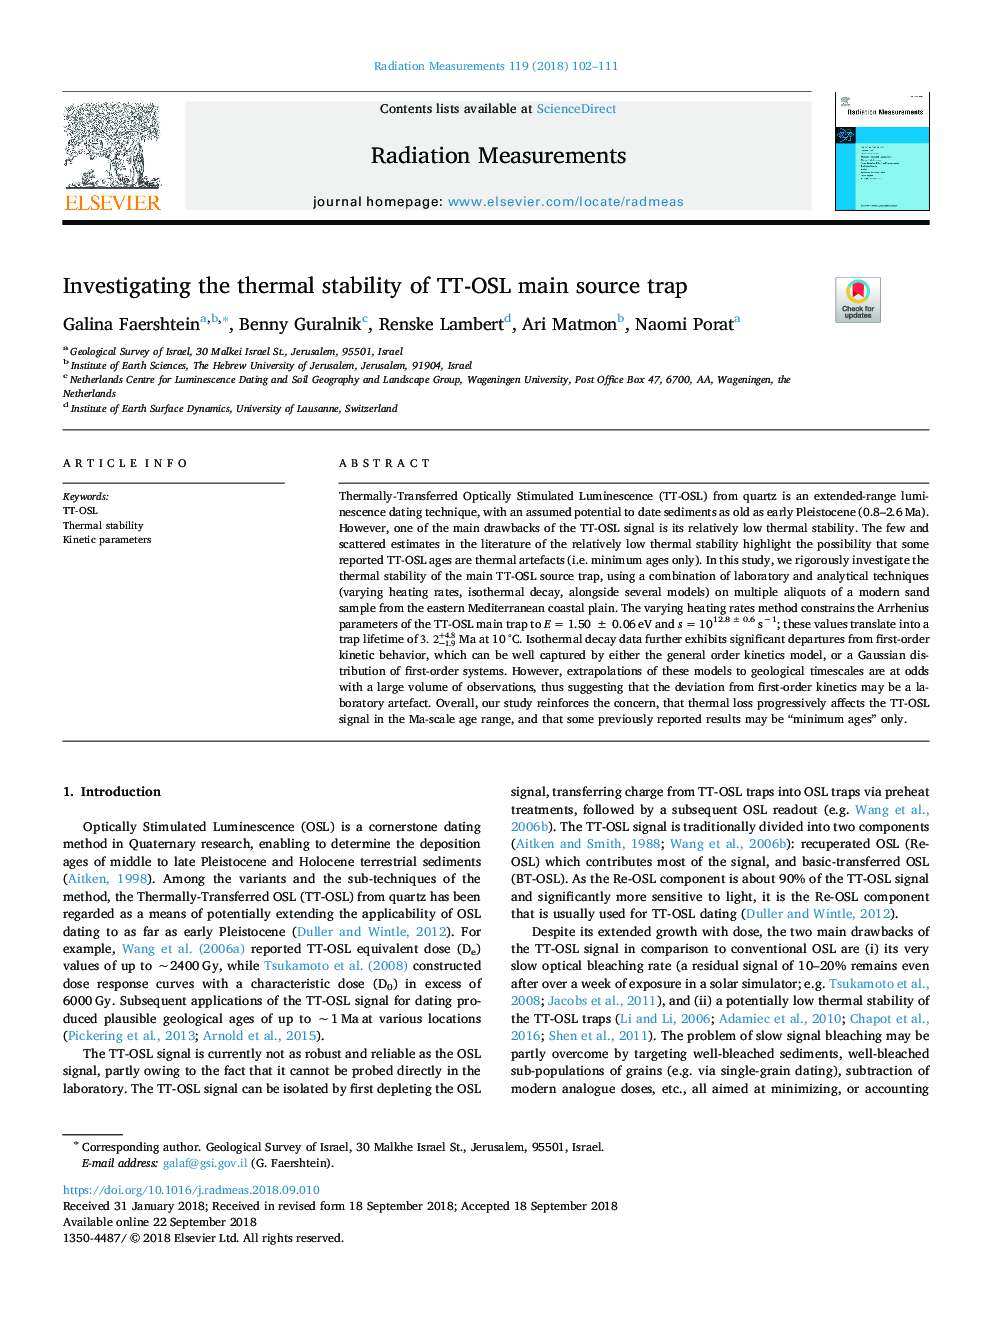 Investigating the thermal stability of TT-OSL main source trap